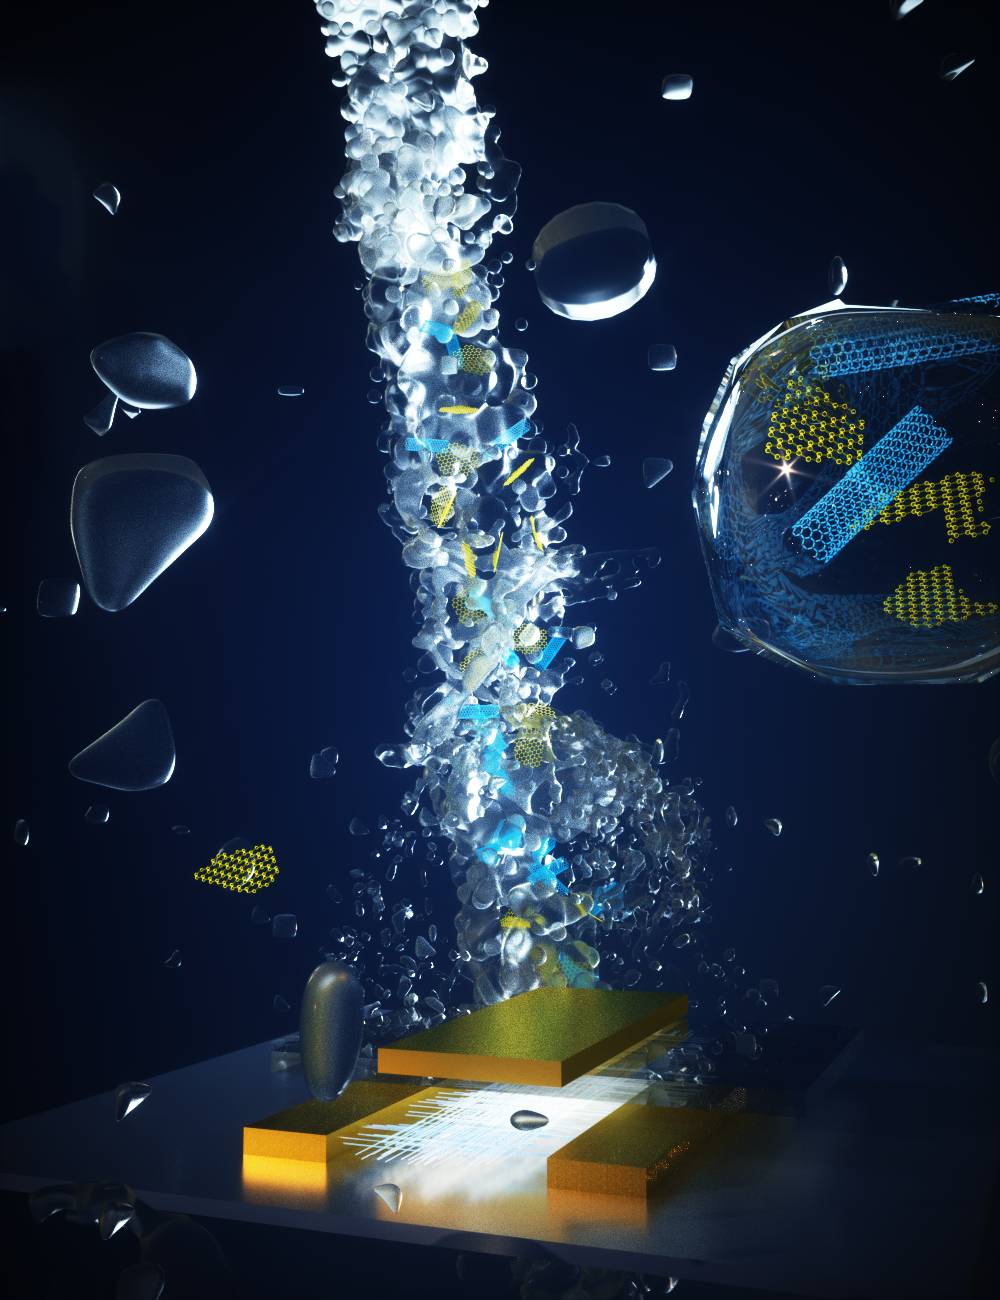 artistic depiction of water jets moving through a printer